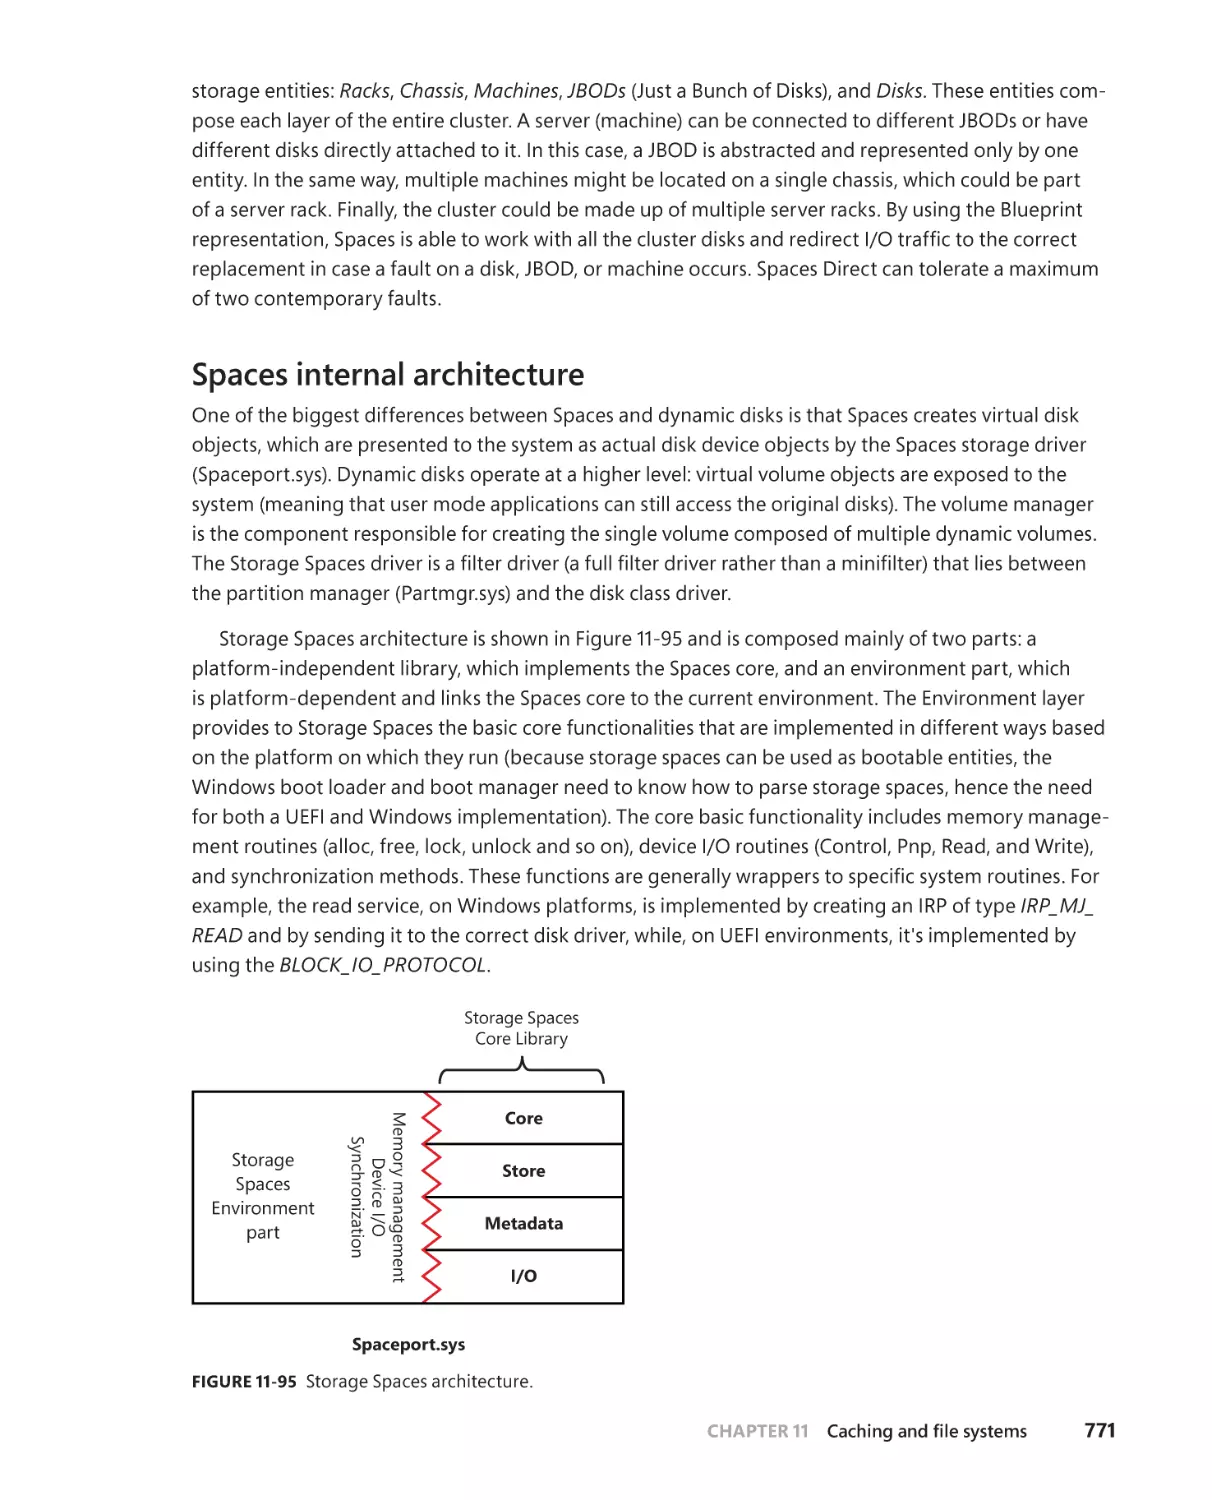 Spaces internal architecture